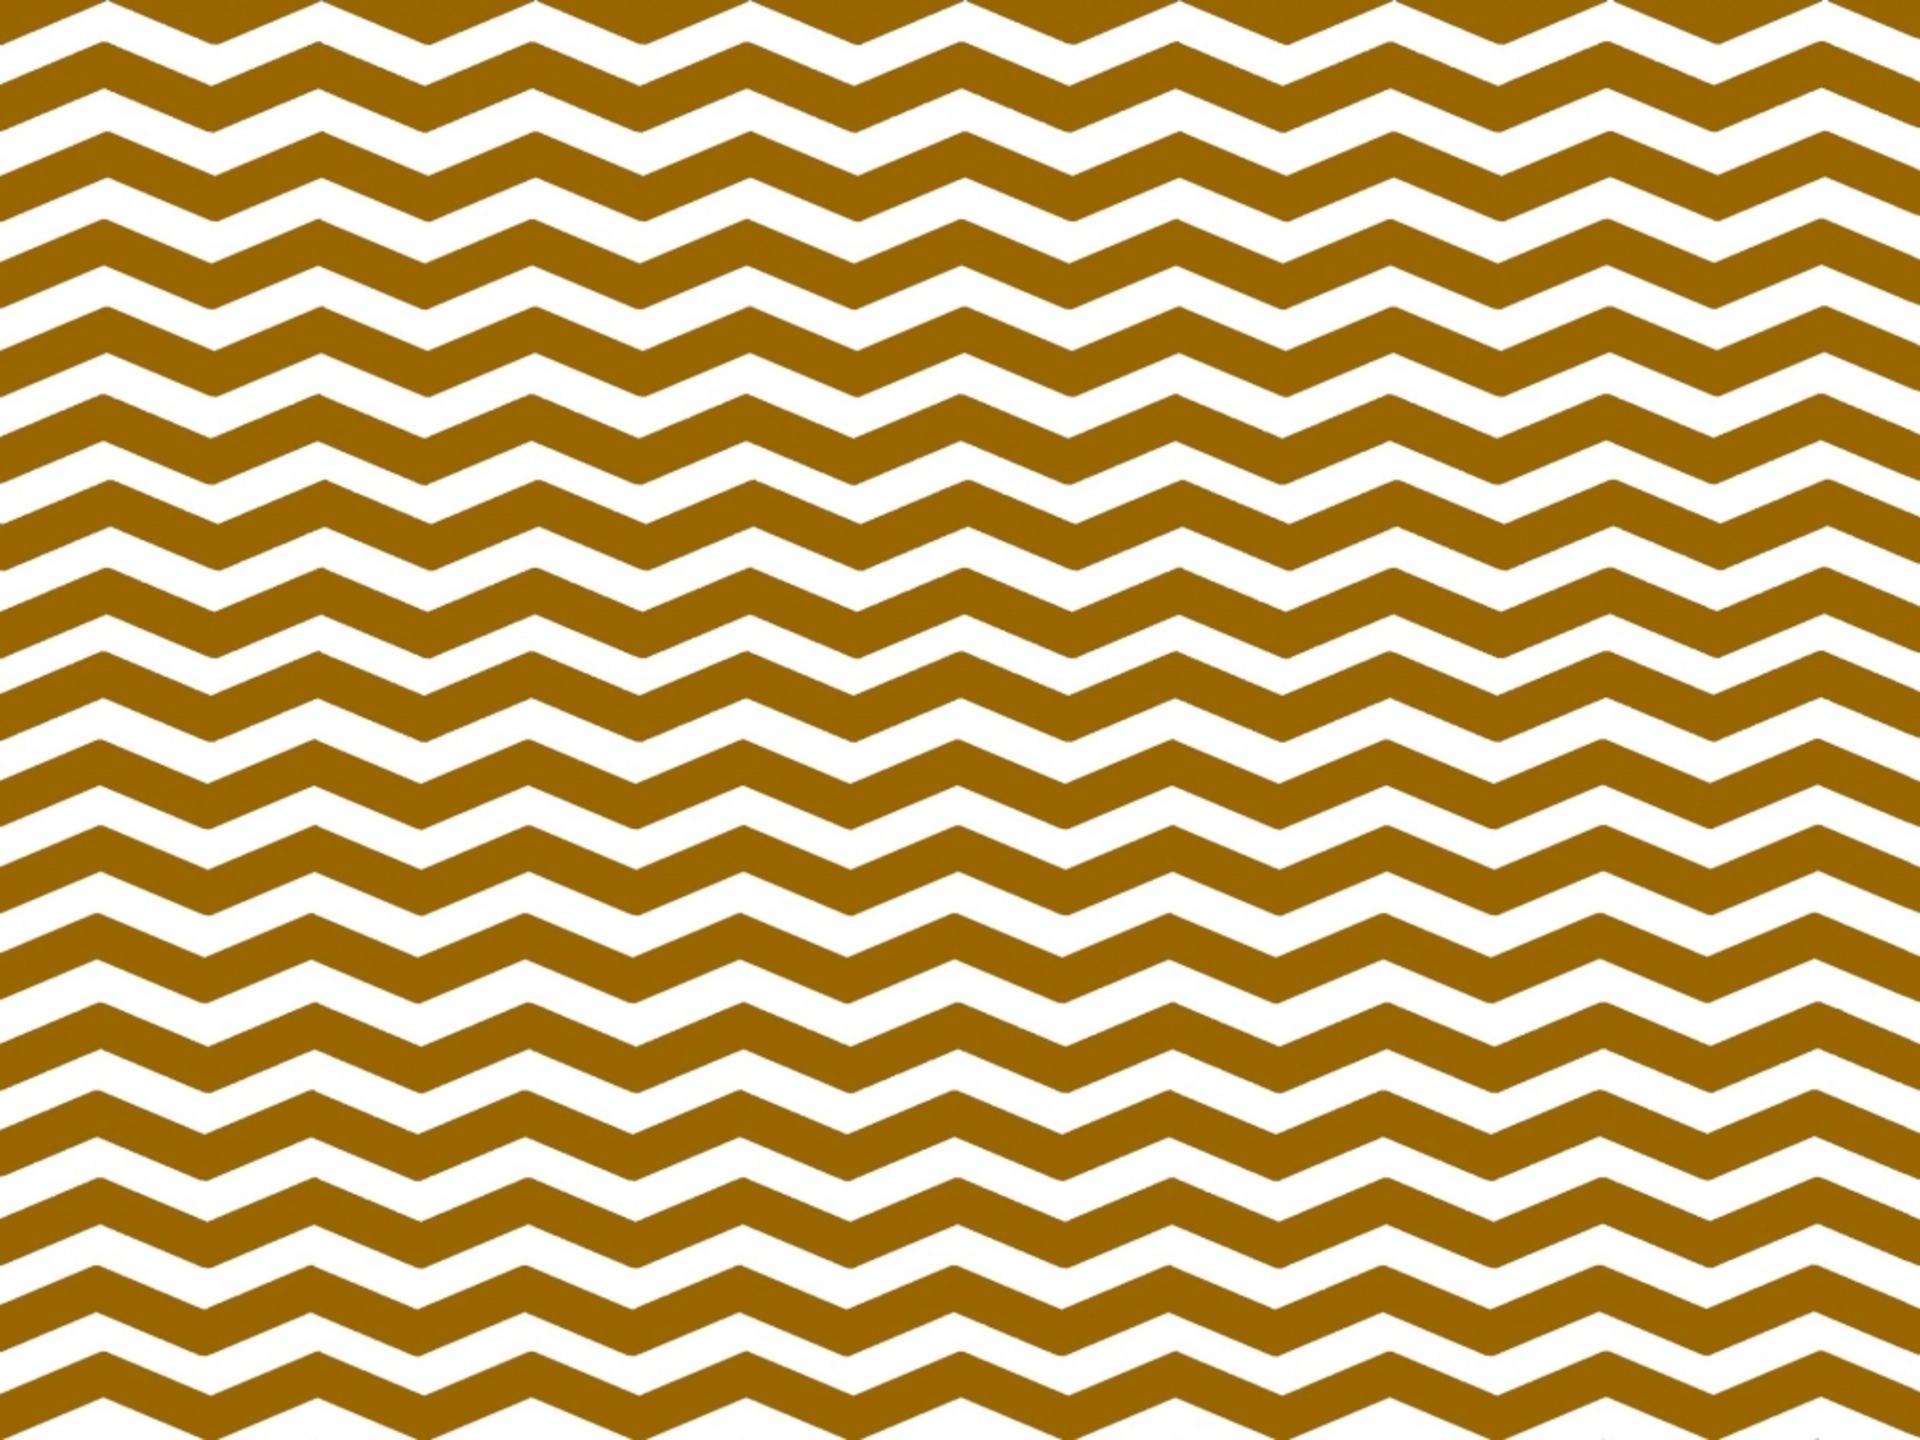 Wallpaper Doodle Craft New Colors Chevron Background Patterns